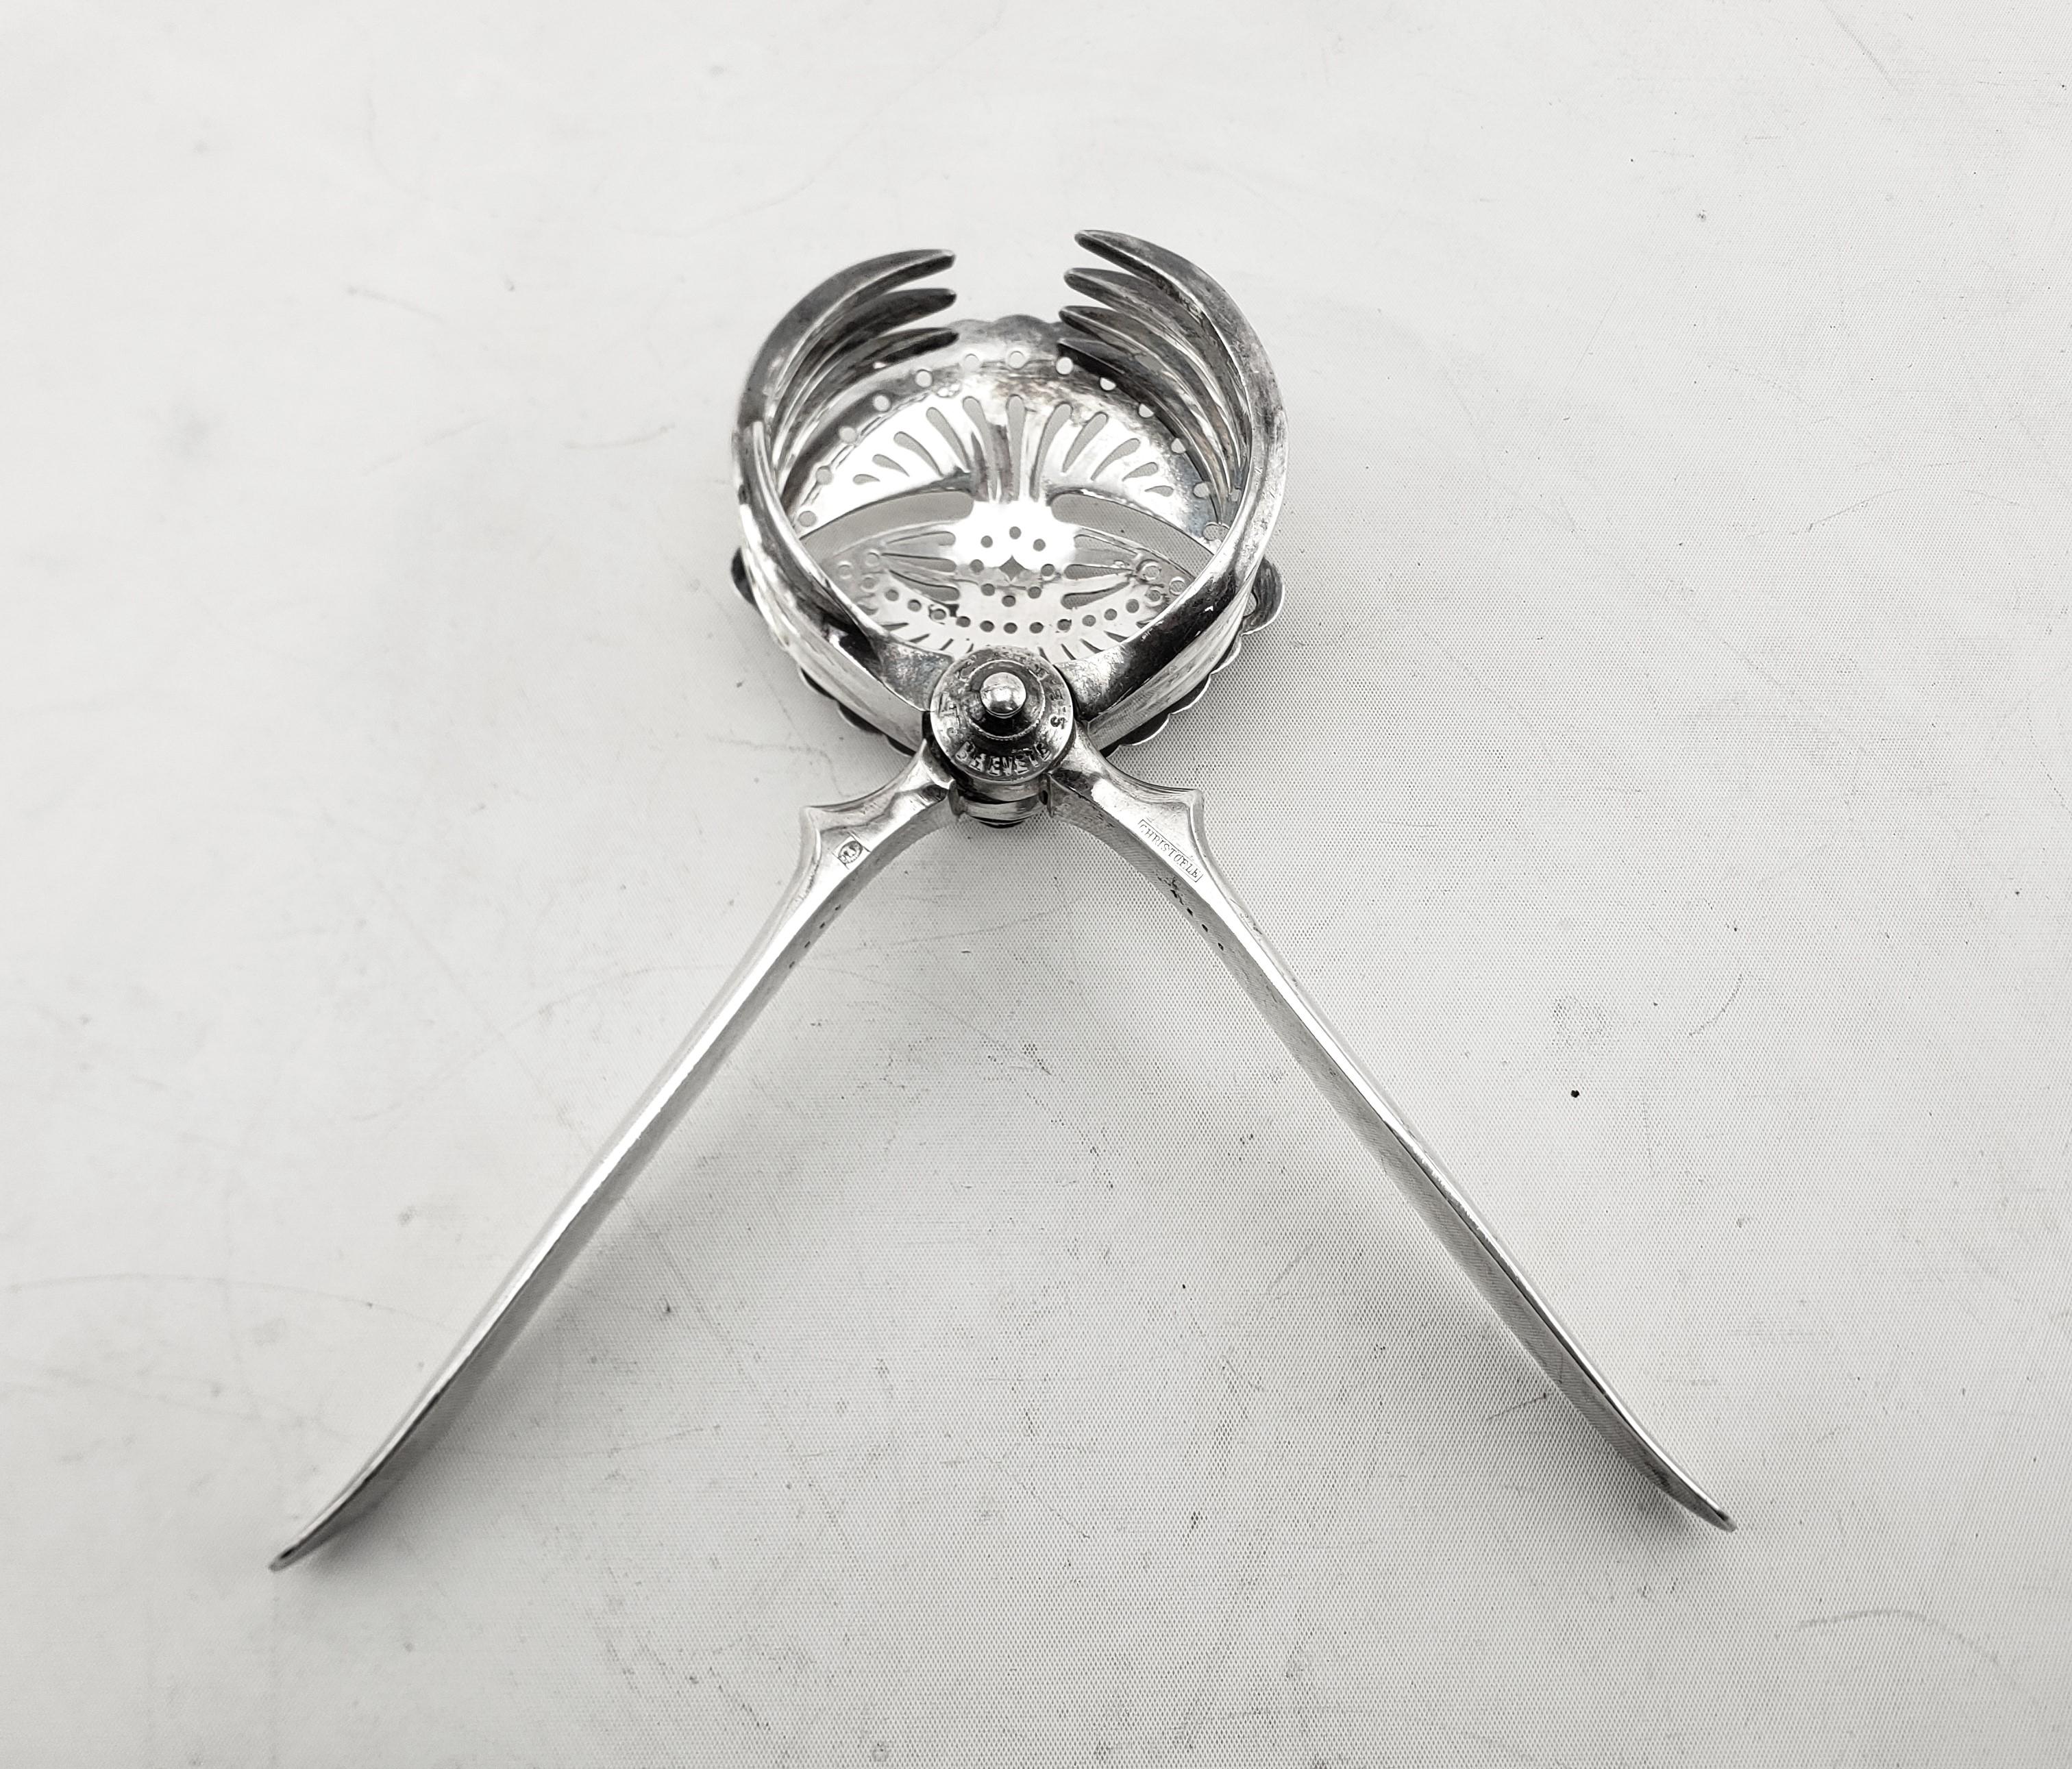 Christofle Antique Silver Plated Citrus Hand Press or Lemon Squeezer In Good Condition For Sale In Hamilton, Ontario